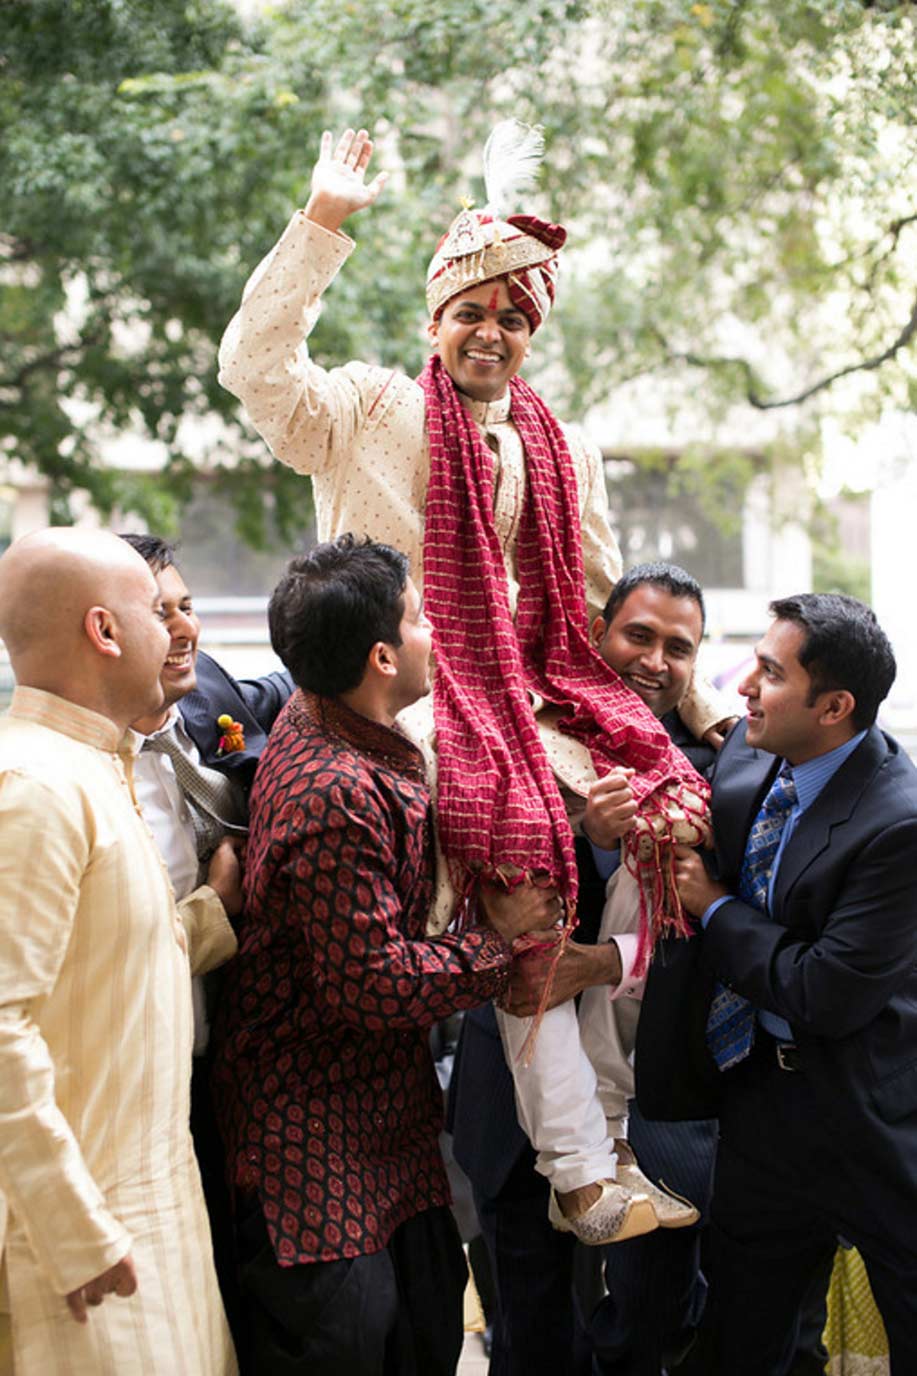 Indian wedding baraat, groom lifted on shoulders at procession at Belo Mansion in Dallas